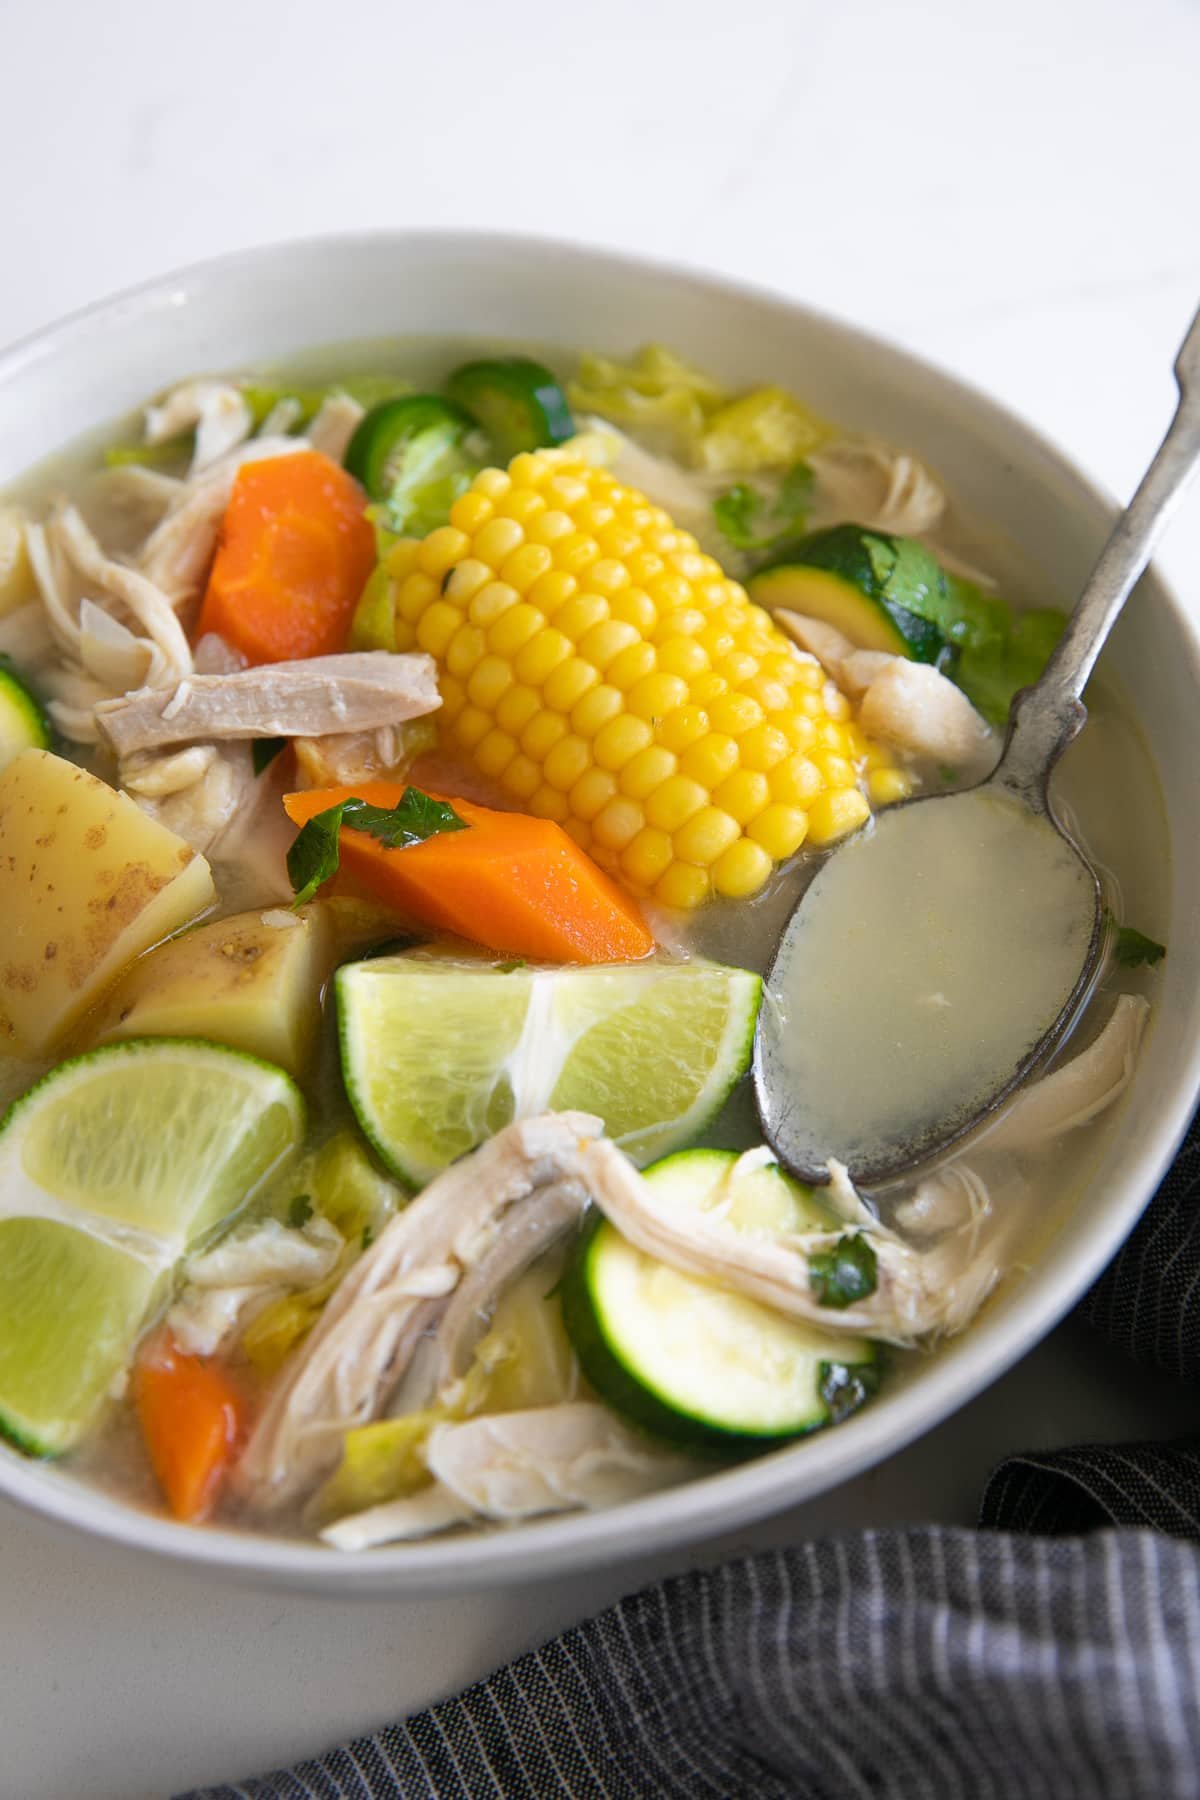 Large white shallow bowl filled with caldo de pollo made with chicken, carrots, corn, lime juice, potatoes, and zucchini.